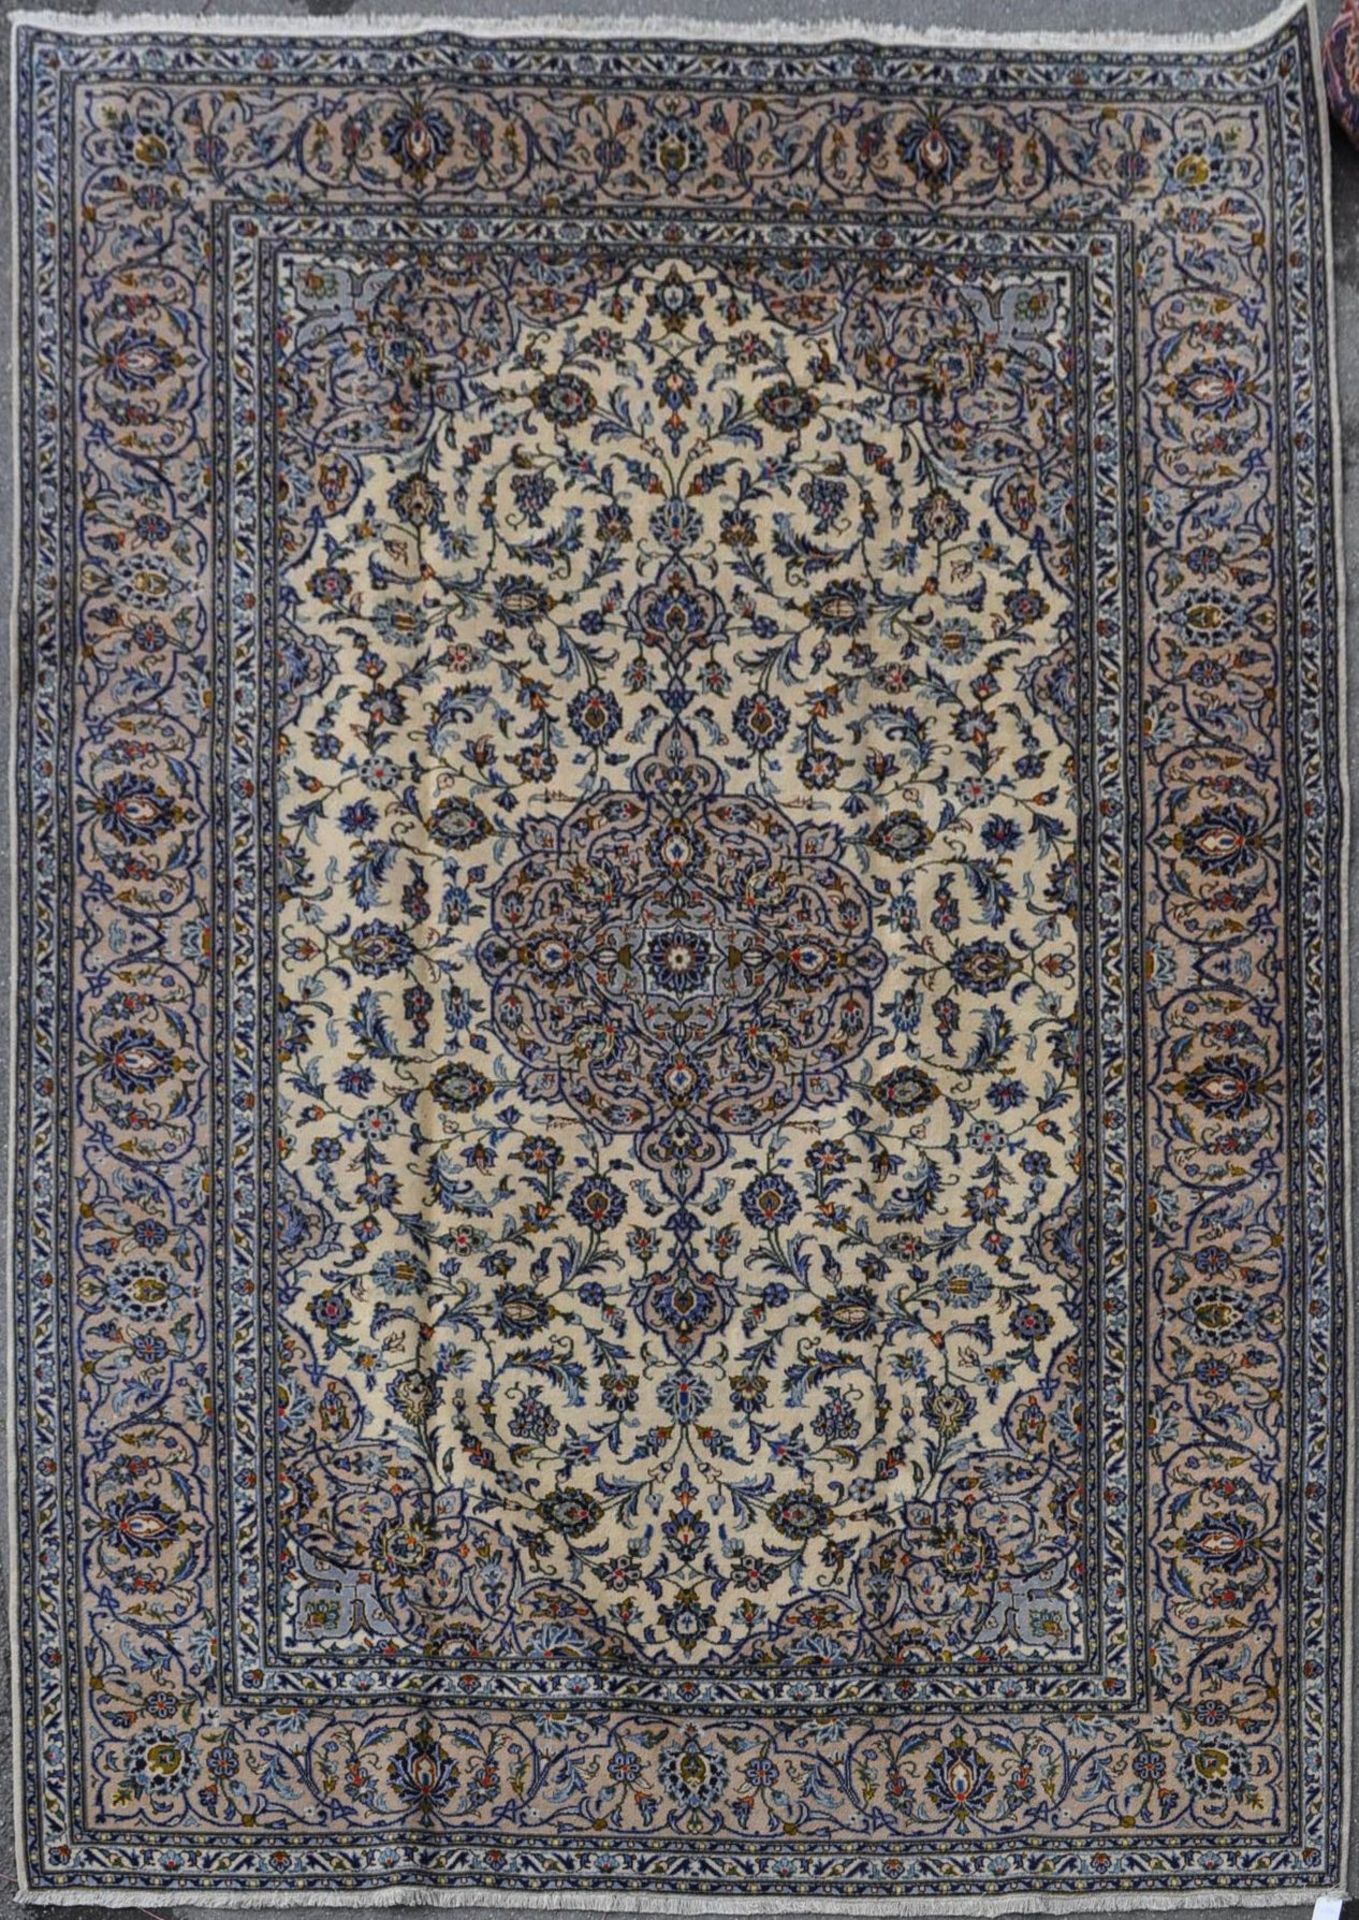 20TH CENTURY CENTRAL PERSIAN KASHAN RUG